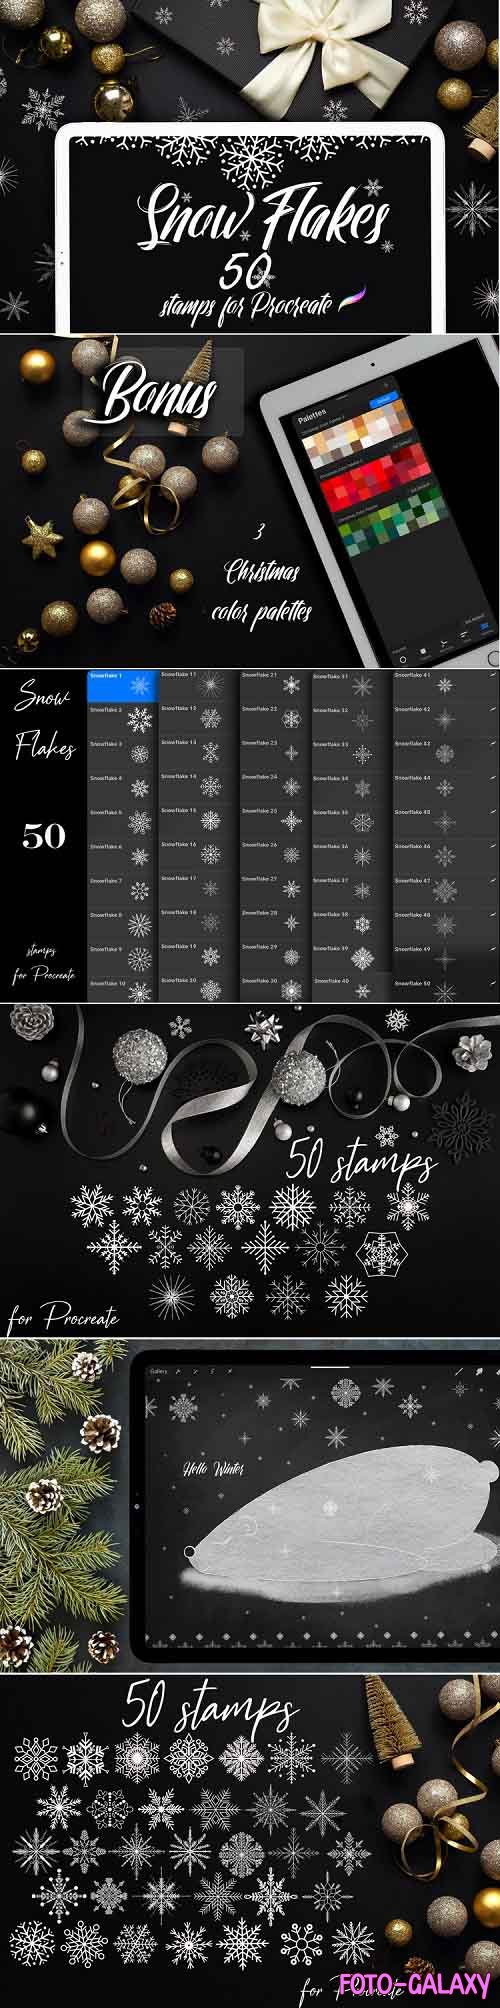 50 Snowflake Stamps for Procreate - 1029308 - Hello Winter!